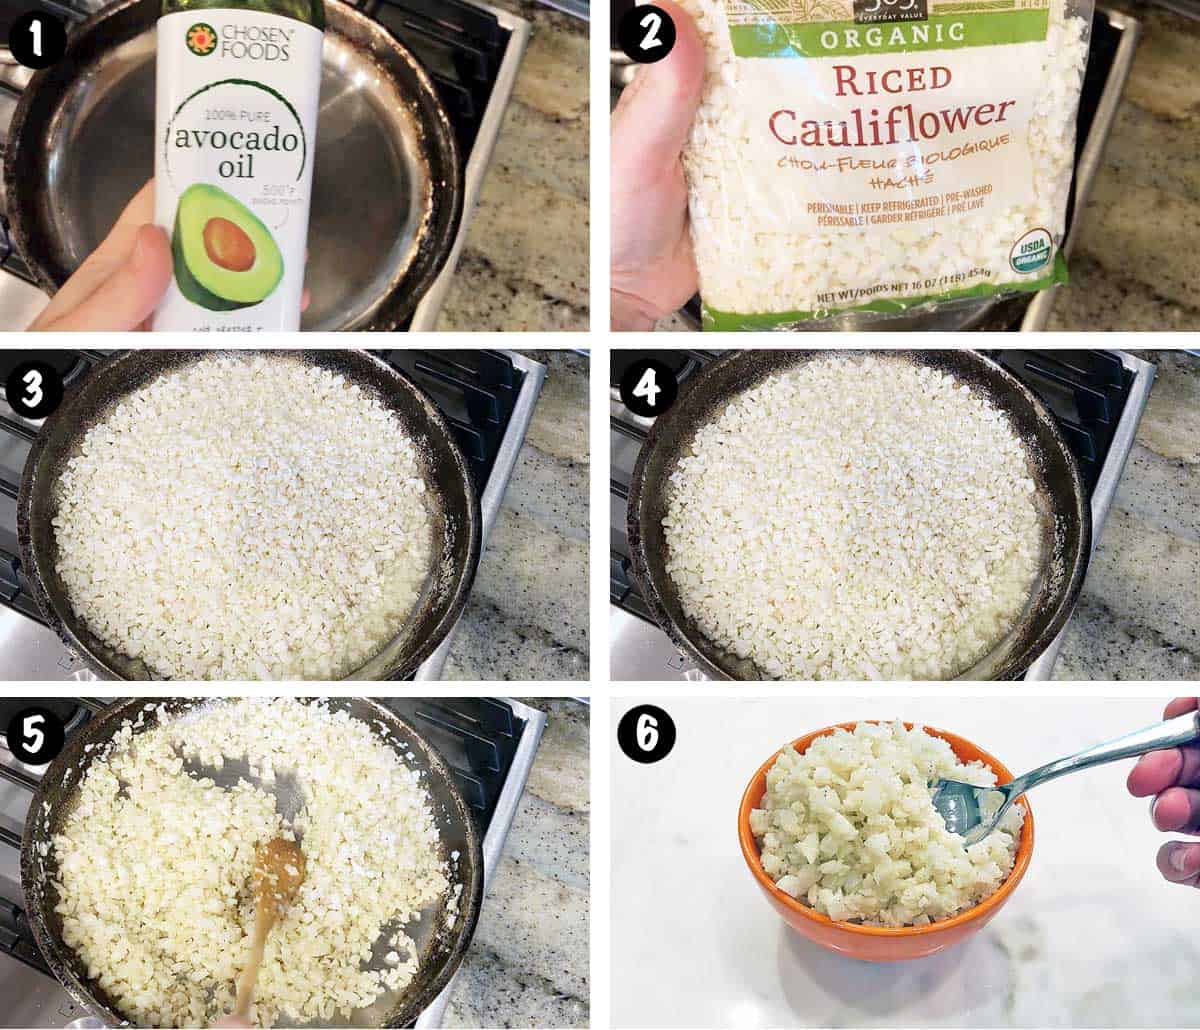 A six-photo collage showing the steps for making riced cauliflower. 